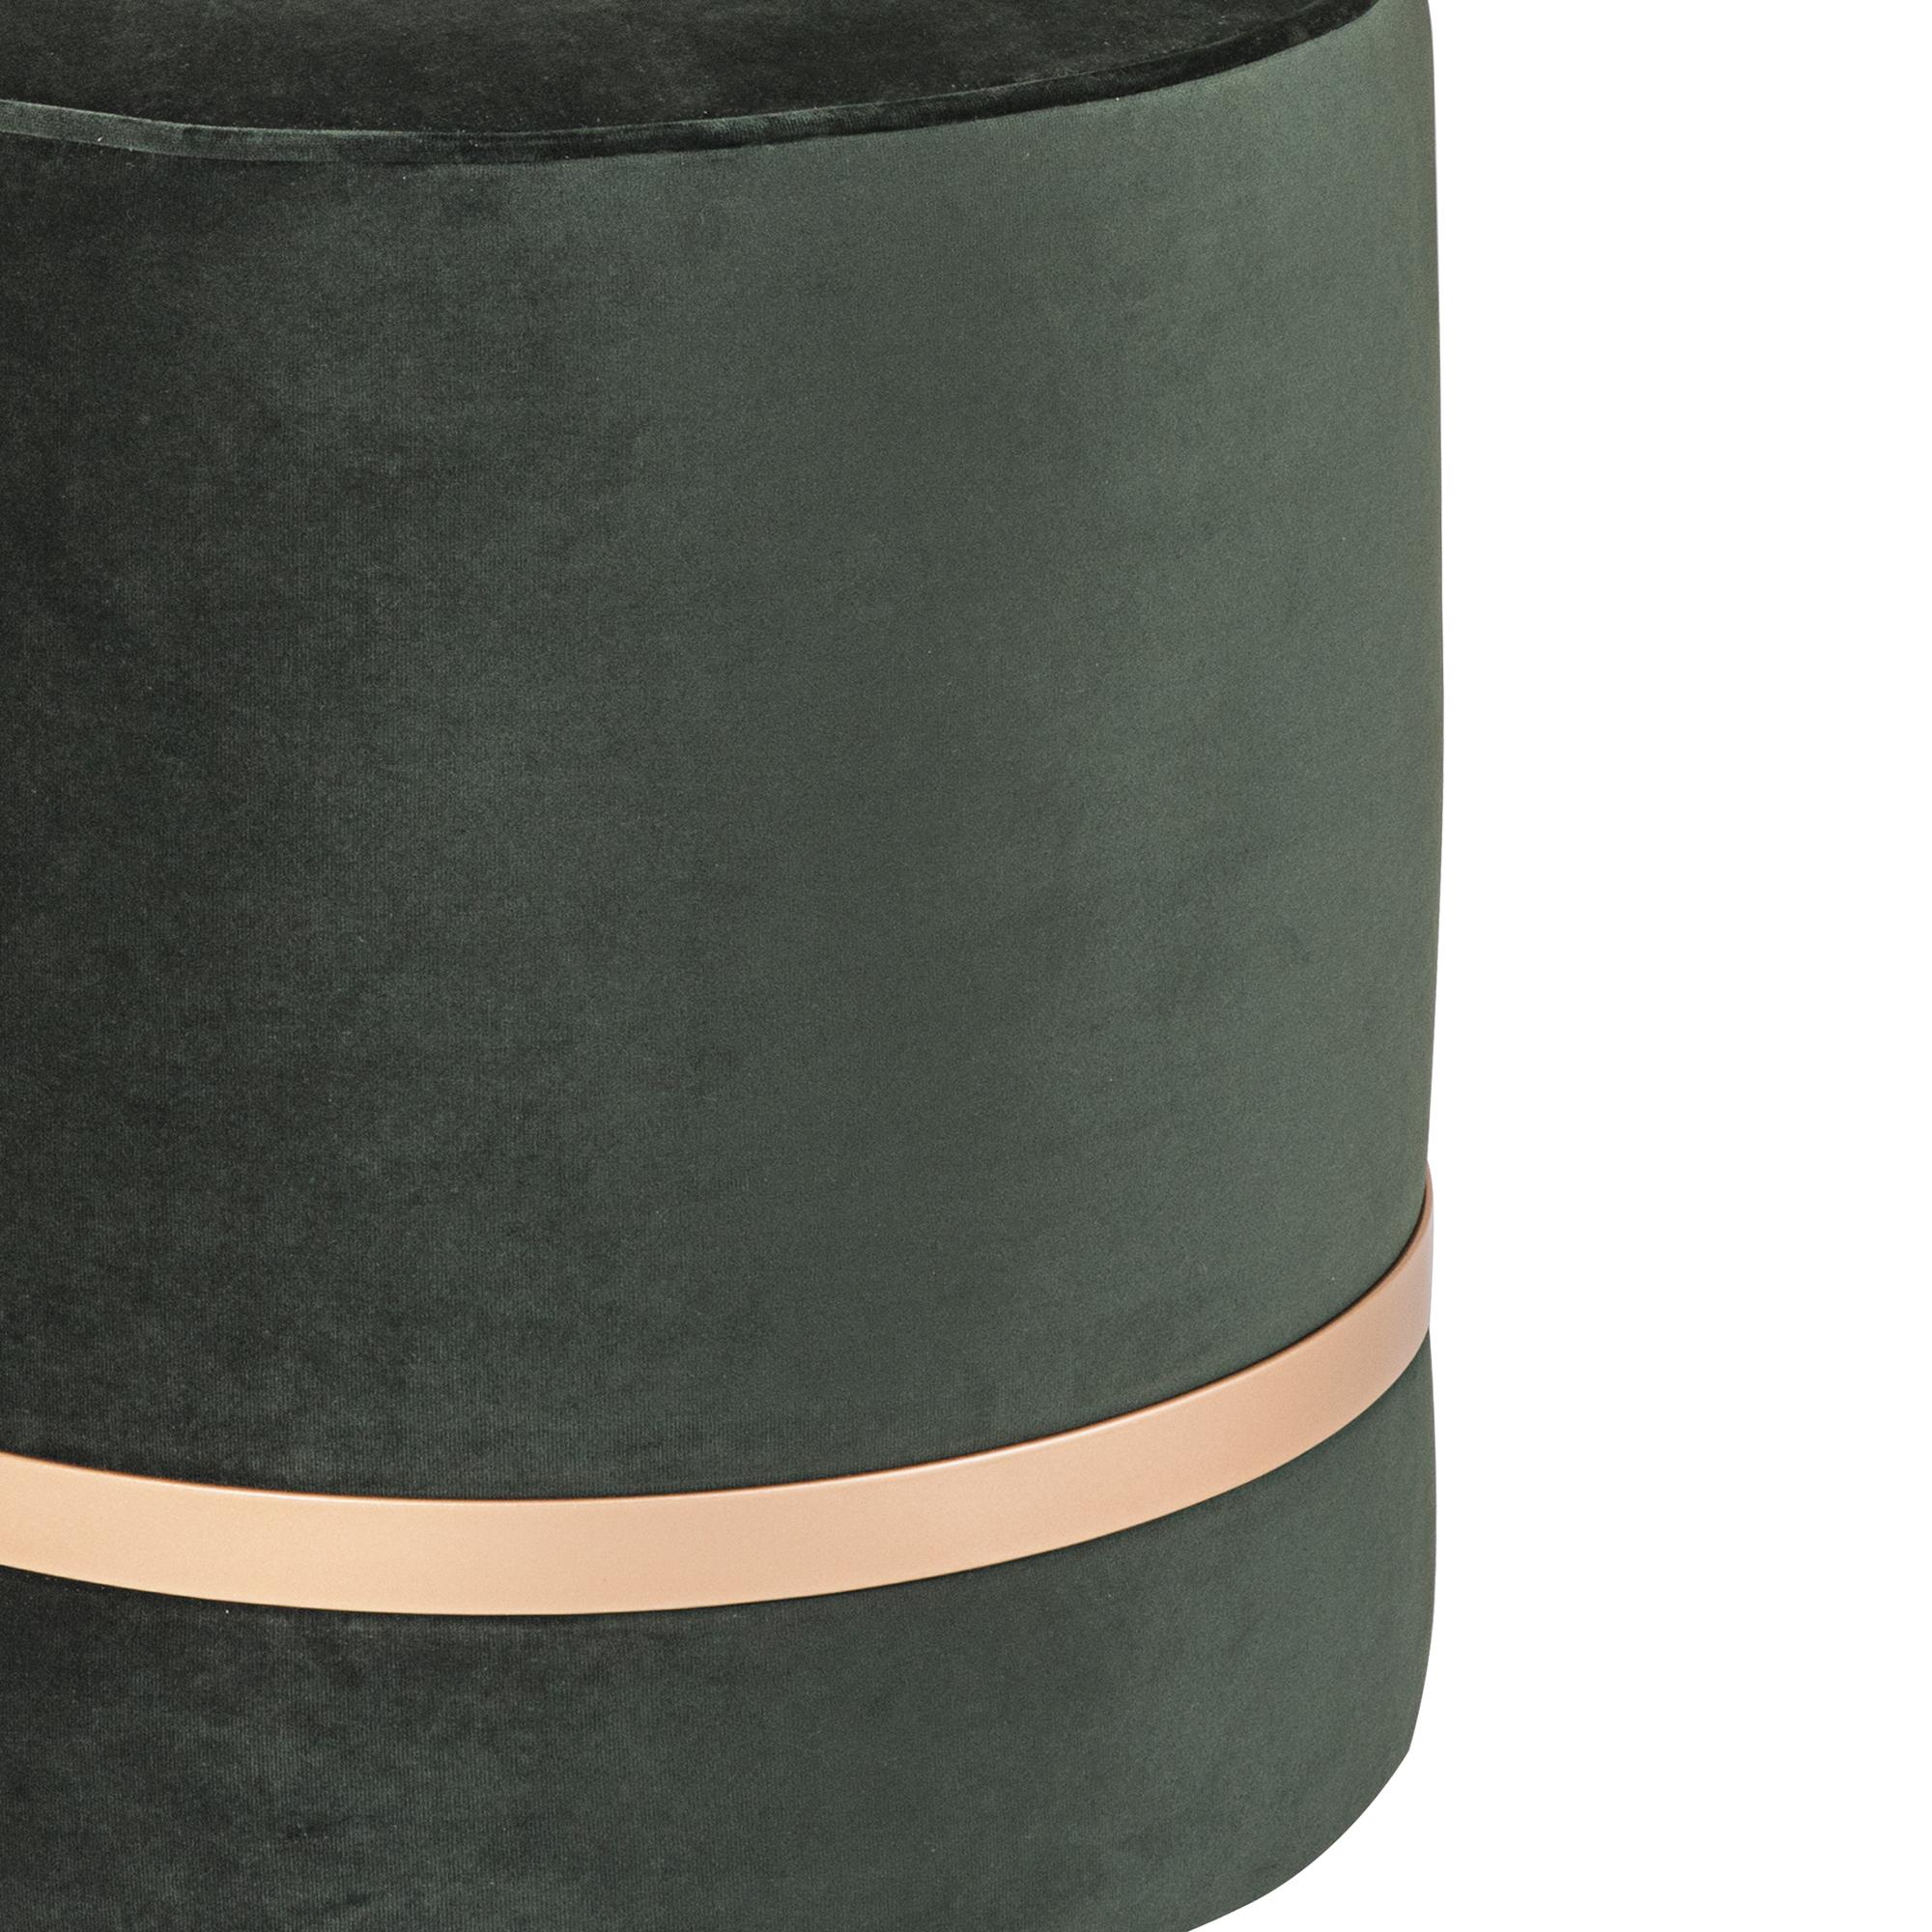 The ottoman has a round shape and is internally produced with wood and foam. It is upholstered with velvet fabric in the options: Green, black, light pink and offwhite, but it can also be customized in another type of finish. Request